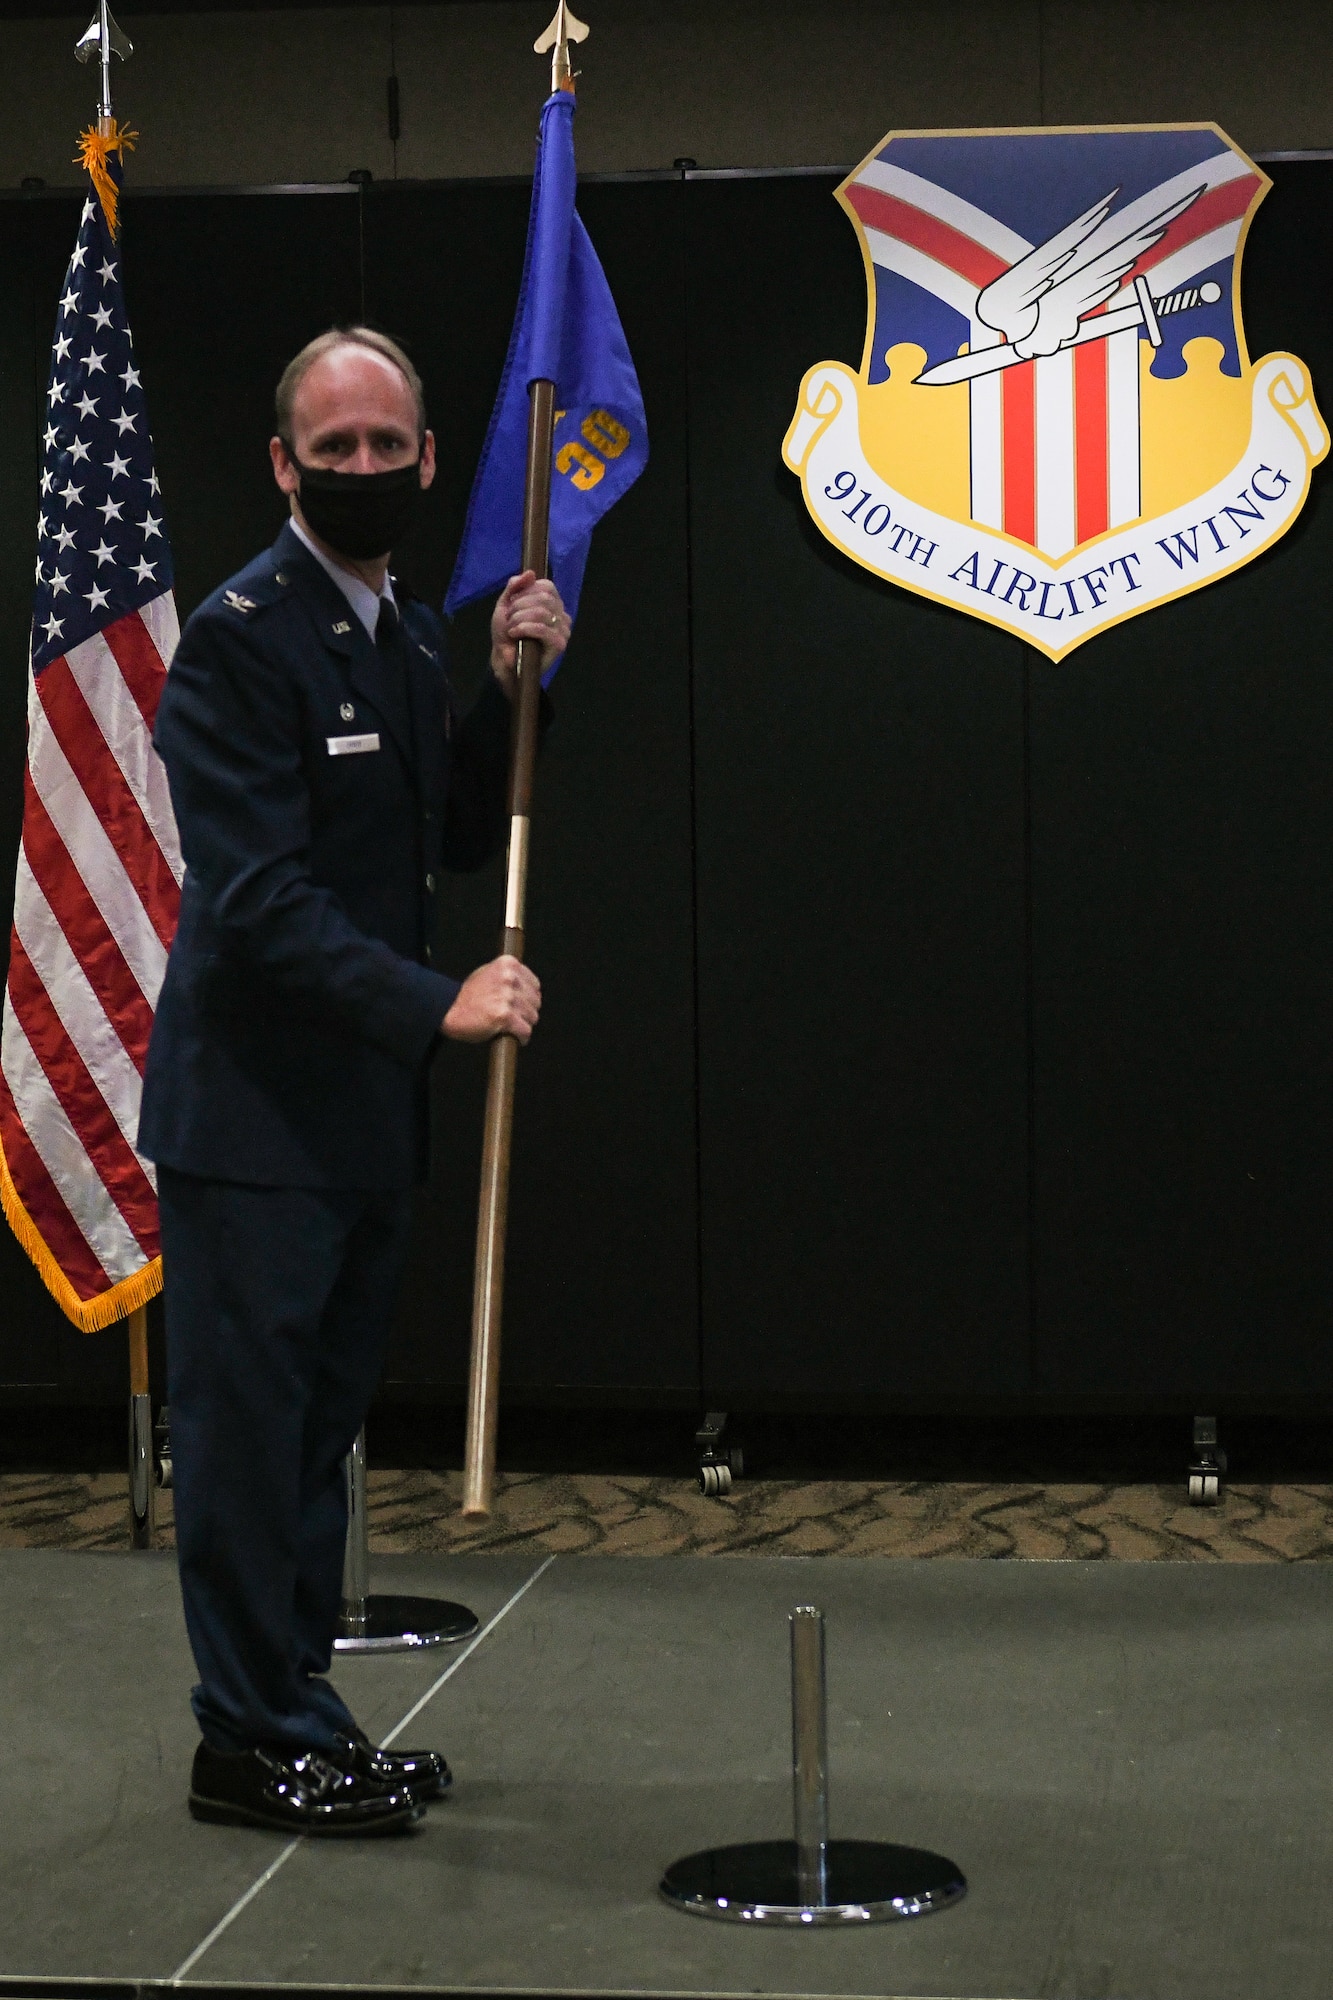 Lt. Col. Scott Lawson assumed command of the 910th Operations Group during an assumption of command ceremony held in Youngstown Air Reserve Station’s community activity center, Dec. 6, 2020.